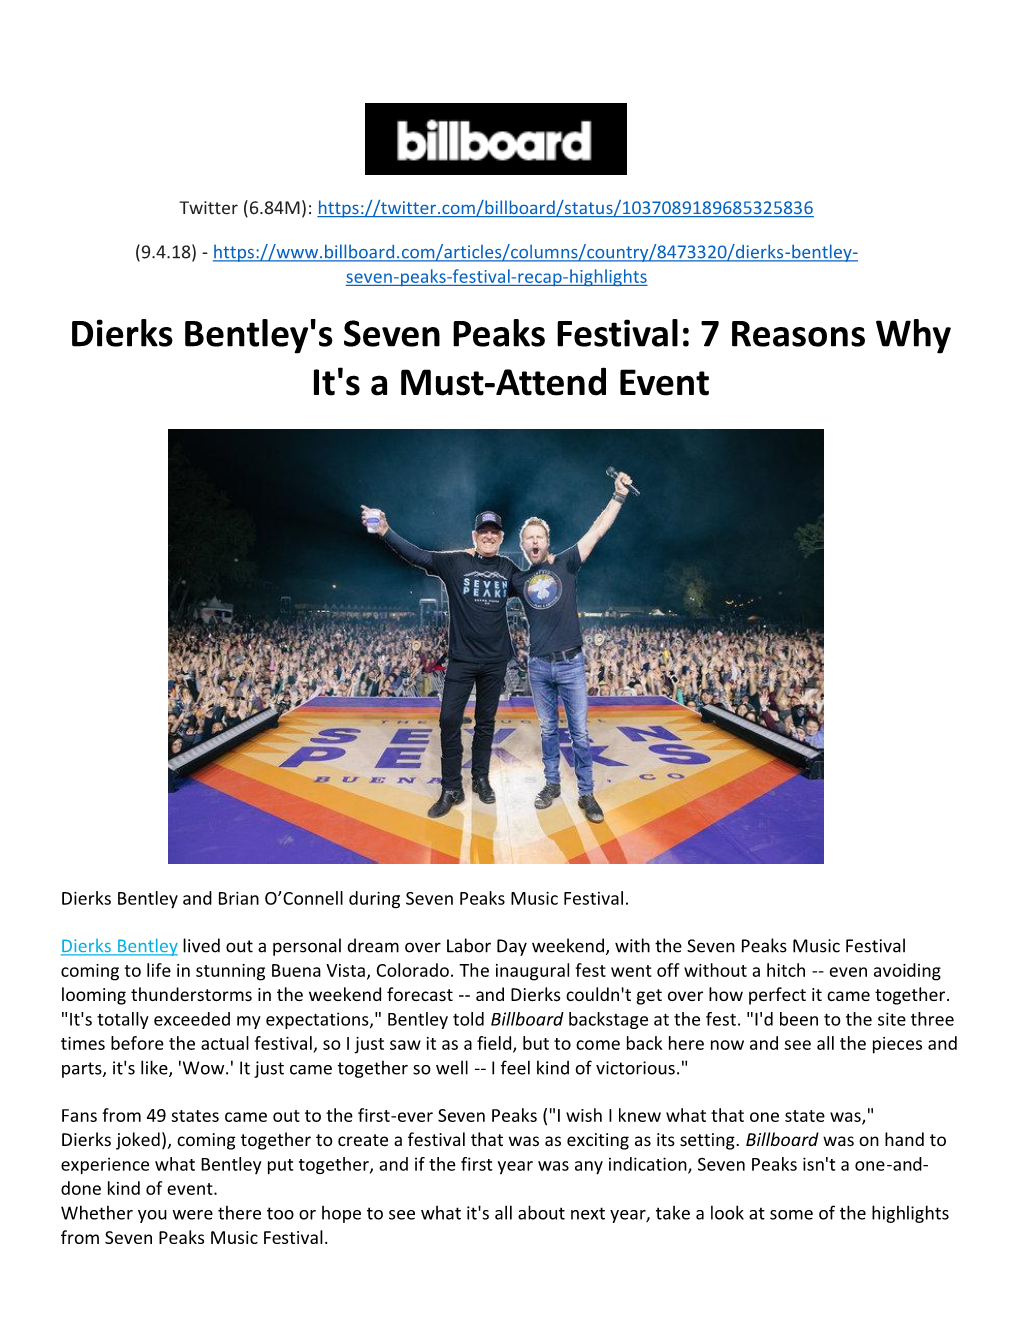 Dierks Bentley's Seven Peaks Festival: 7 Reasons Why It's a Must-Attend Event